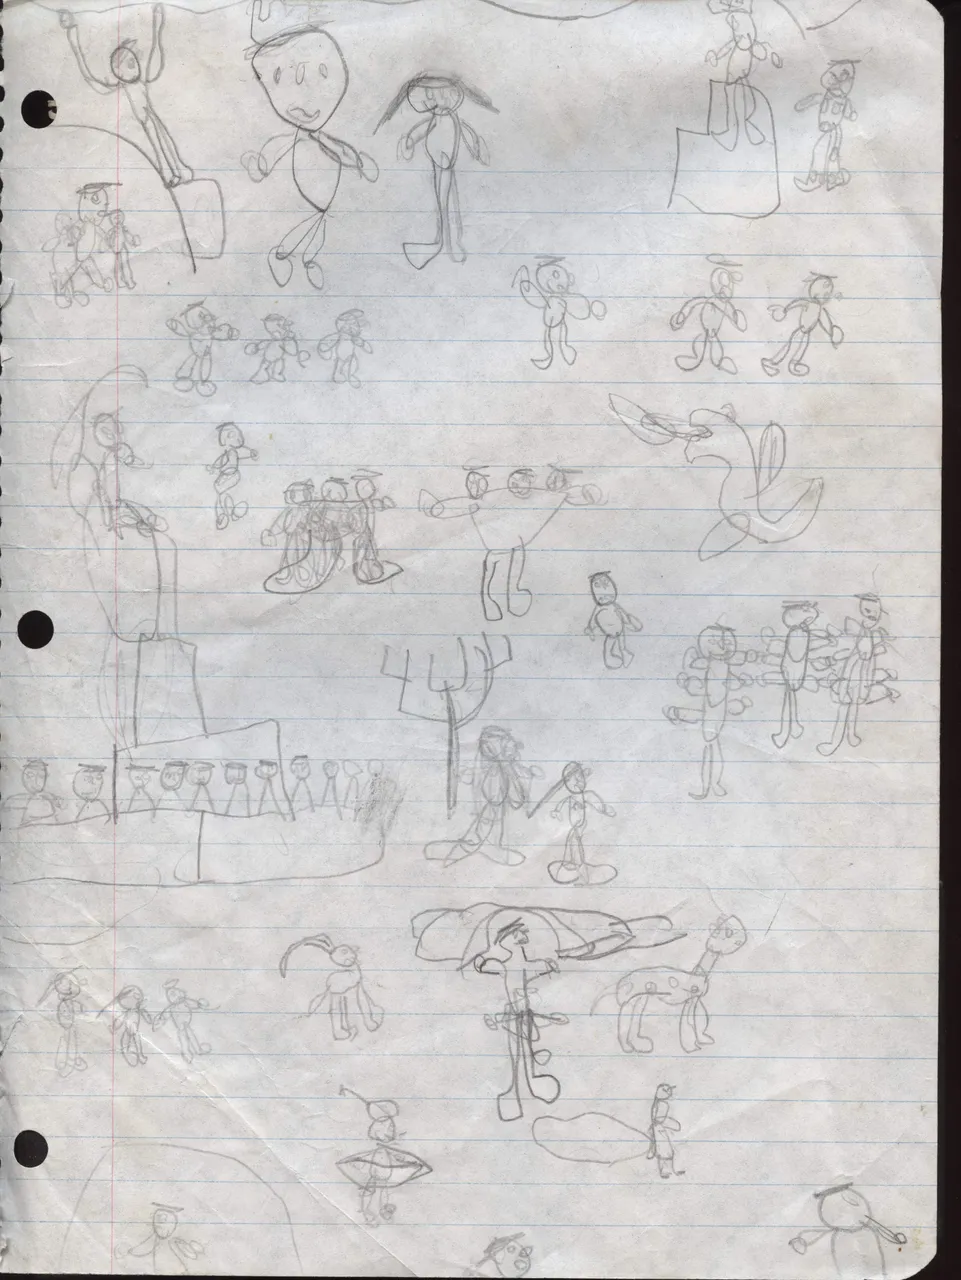 1990-1994 apx art and math and stuff from me and others-29.jpg